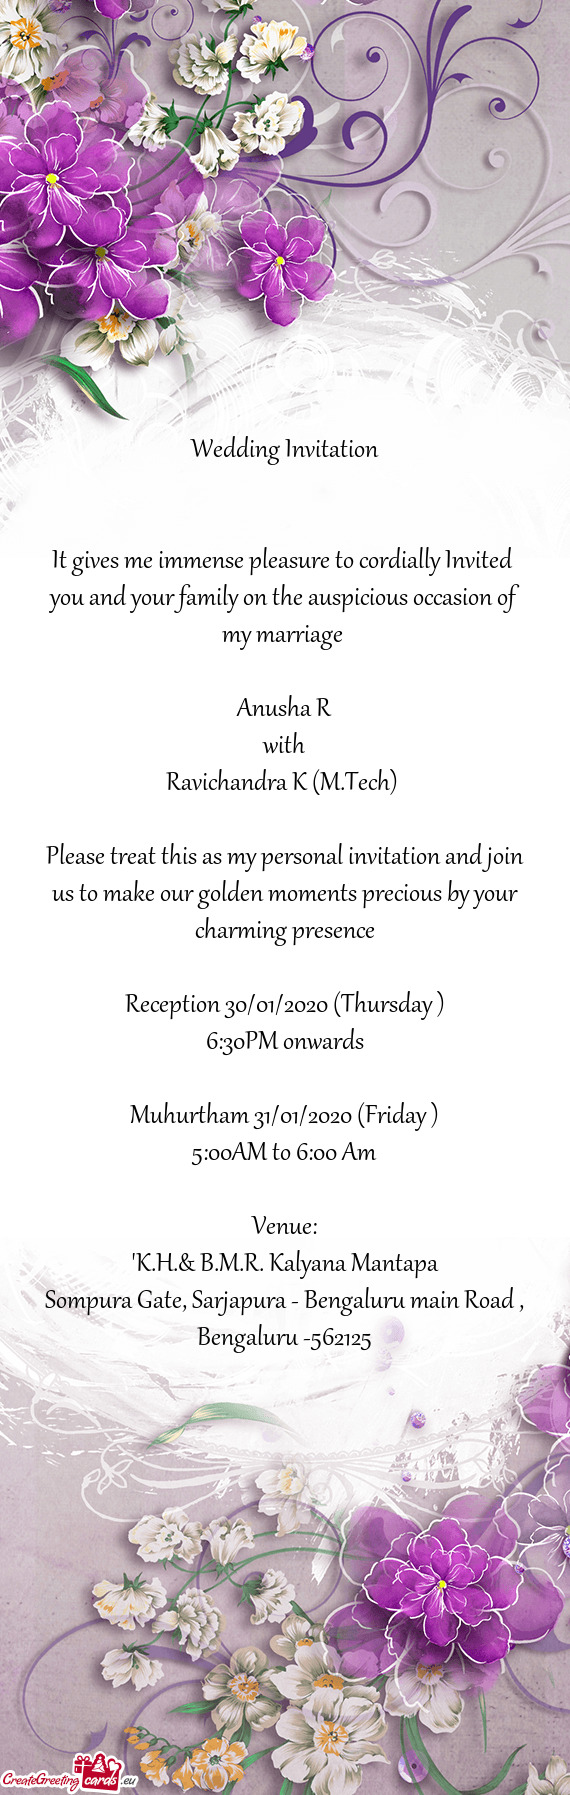 It gives me immense pleasure to cordially Invited you and your family on the auspicious occasion of